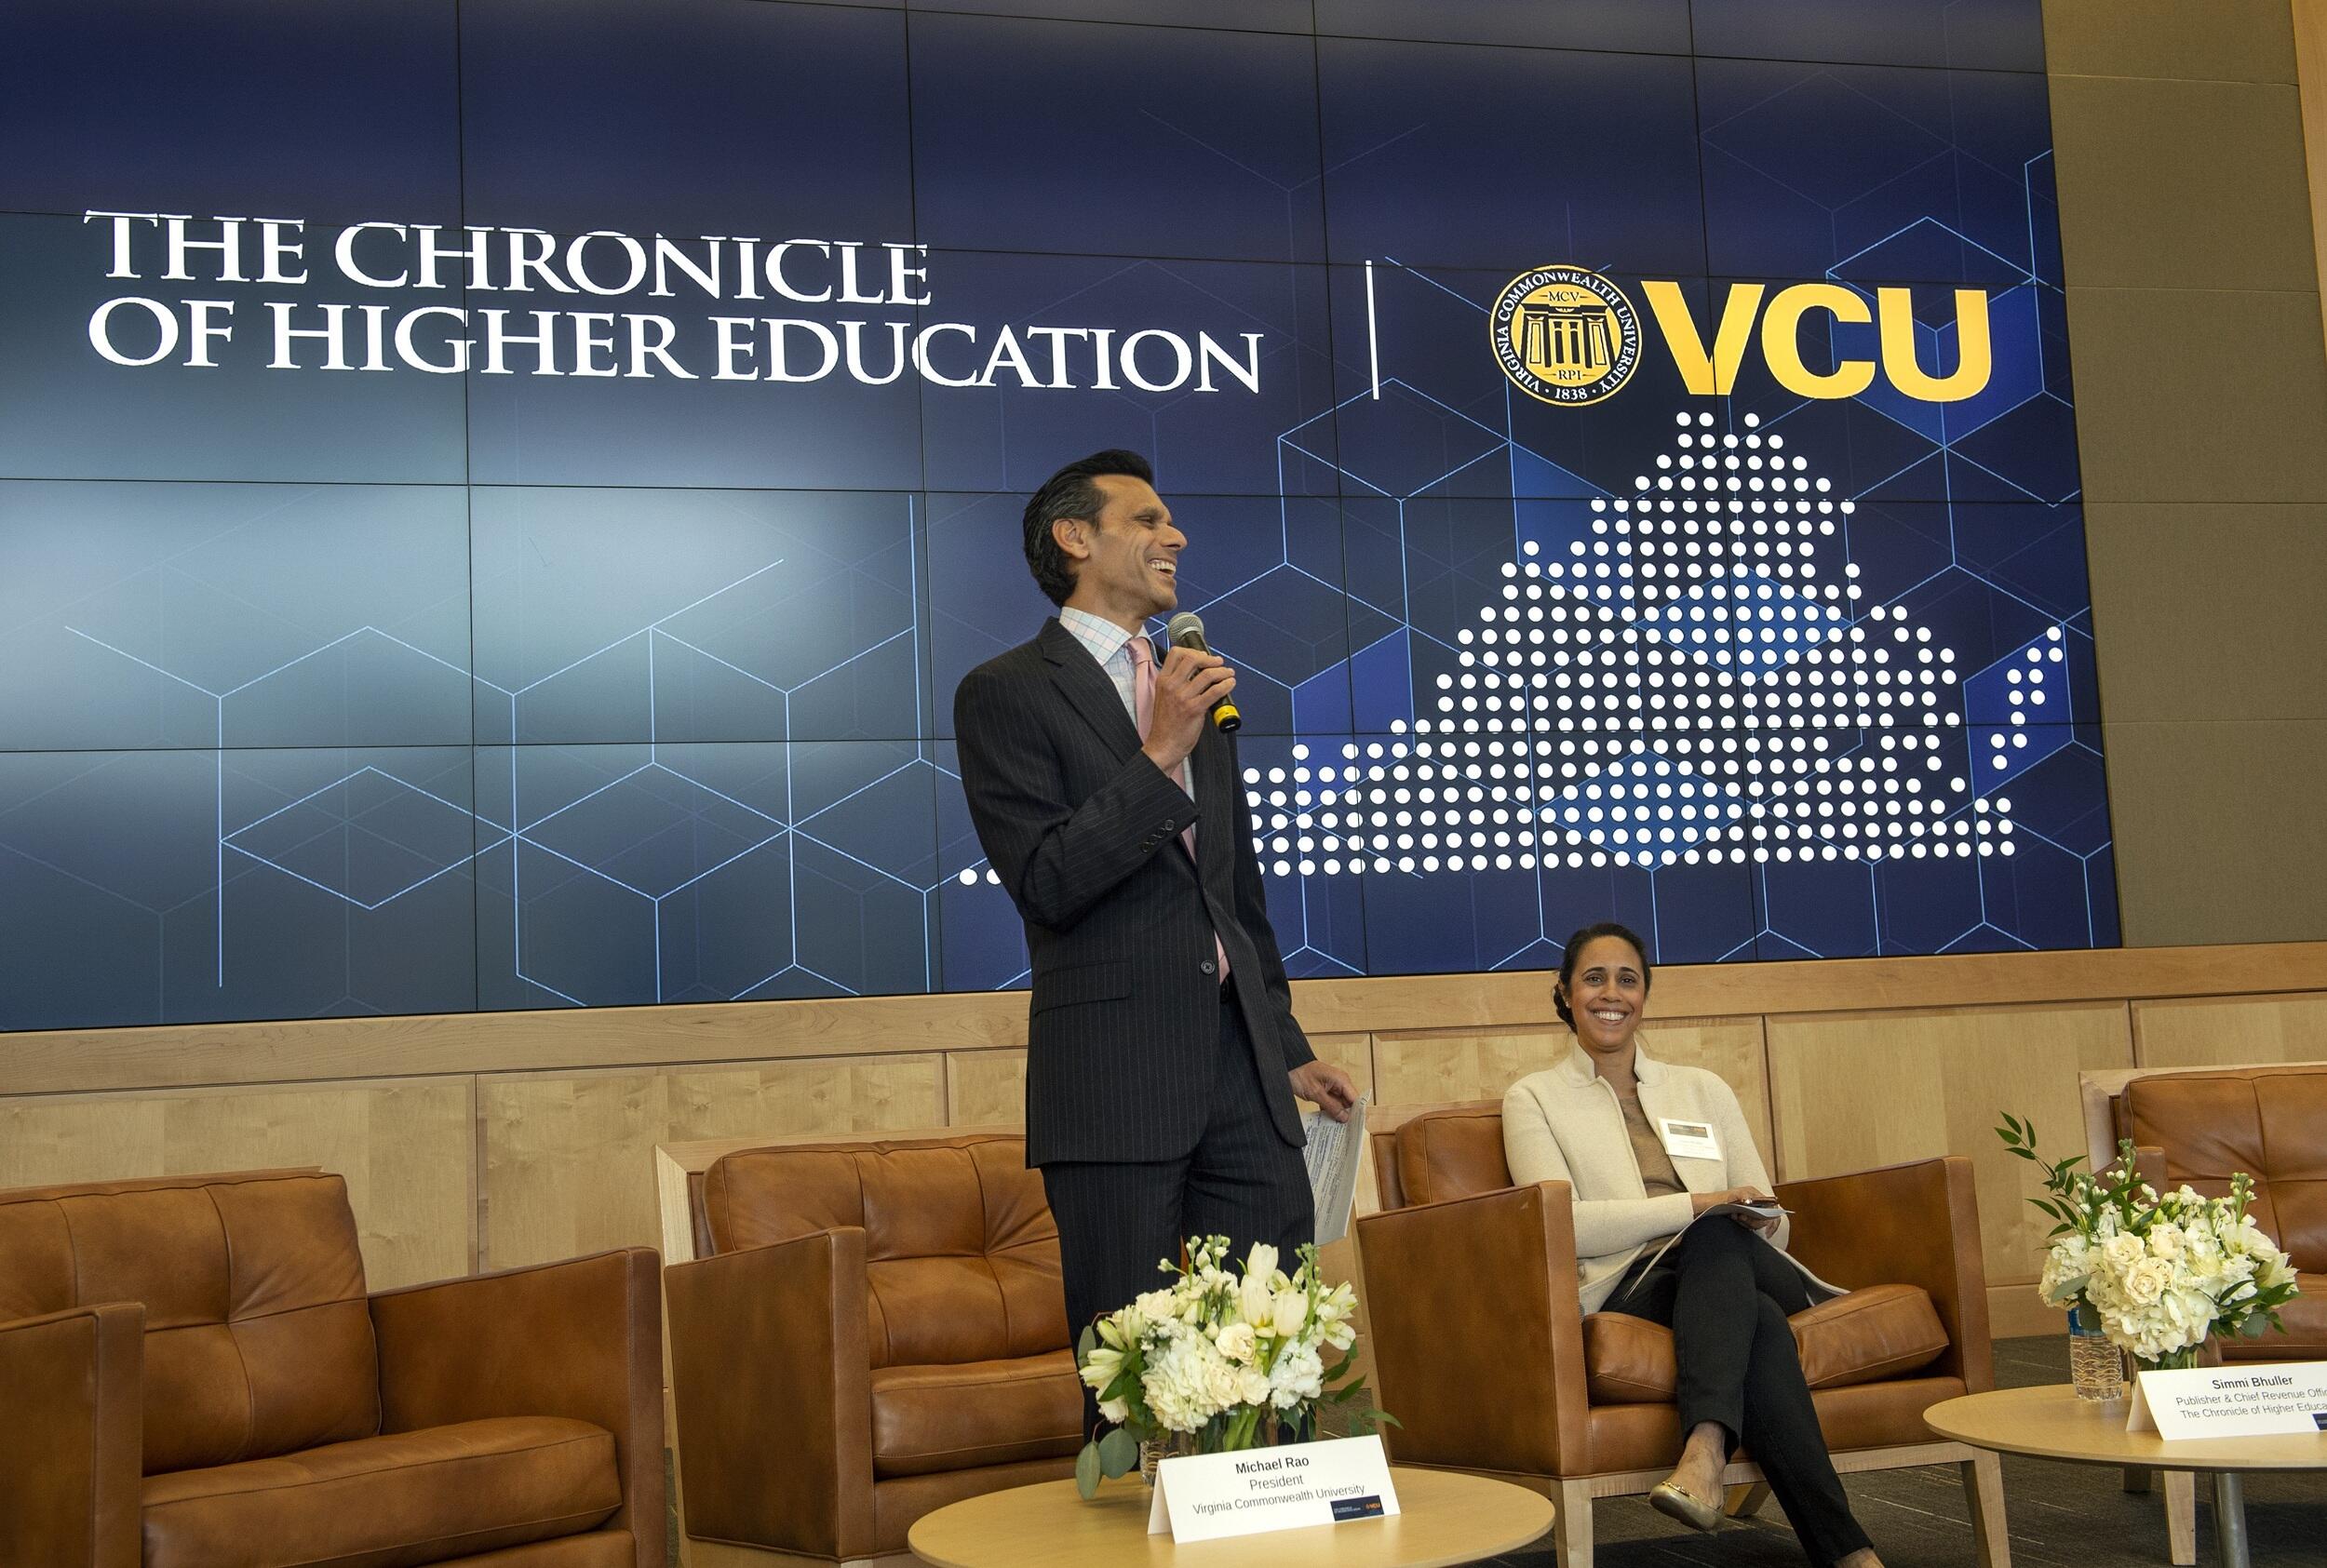 A man standing with a microphone in front of a screen that says \"THE CHRONICLE OF HIGHER EDUCATION\" next to an illustration of Virginia with the letters \"VCU\" above hit. Next to him a woman is sitting in a brown chair and smiling. 